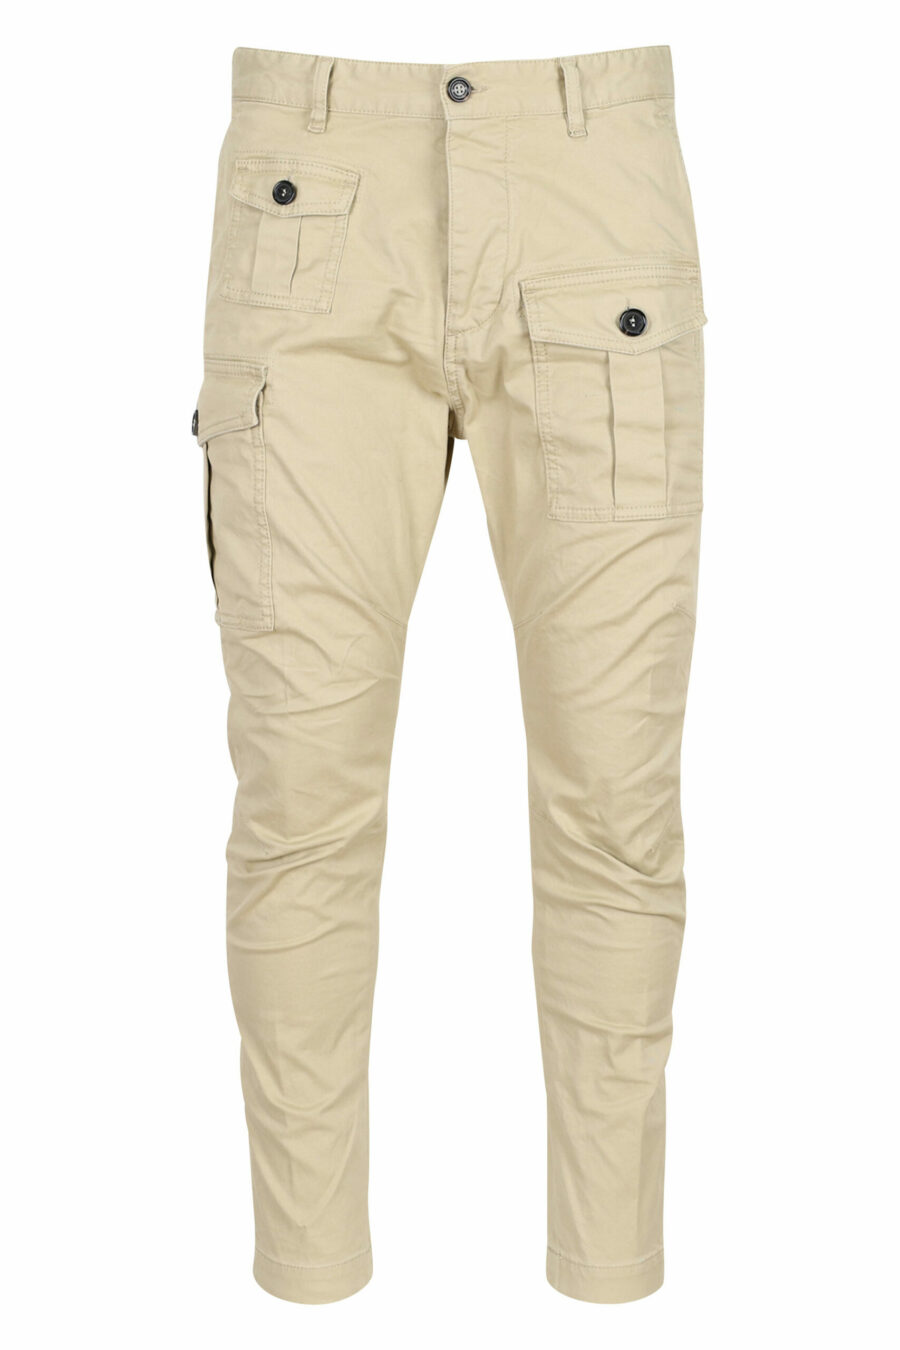 Beige sexy cargo trousers with side pockets - 8052134973615 scaled